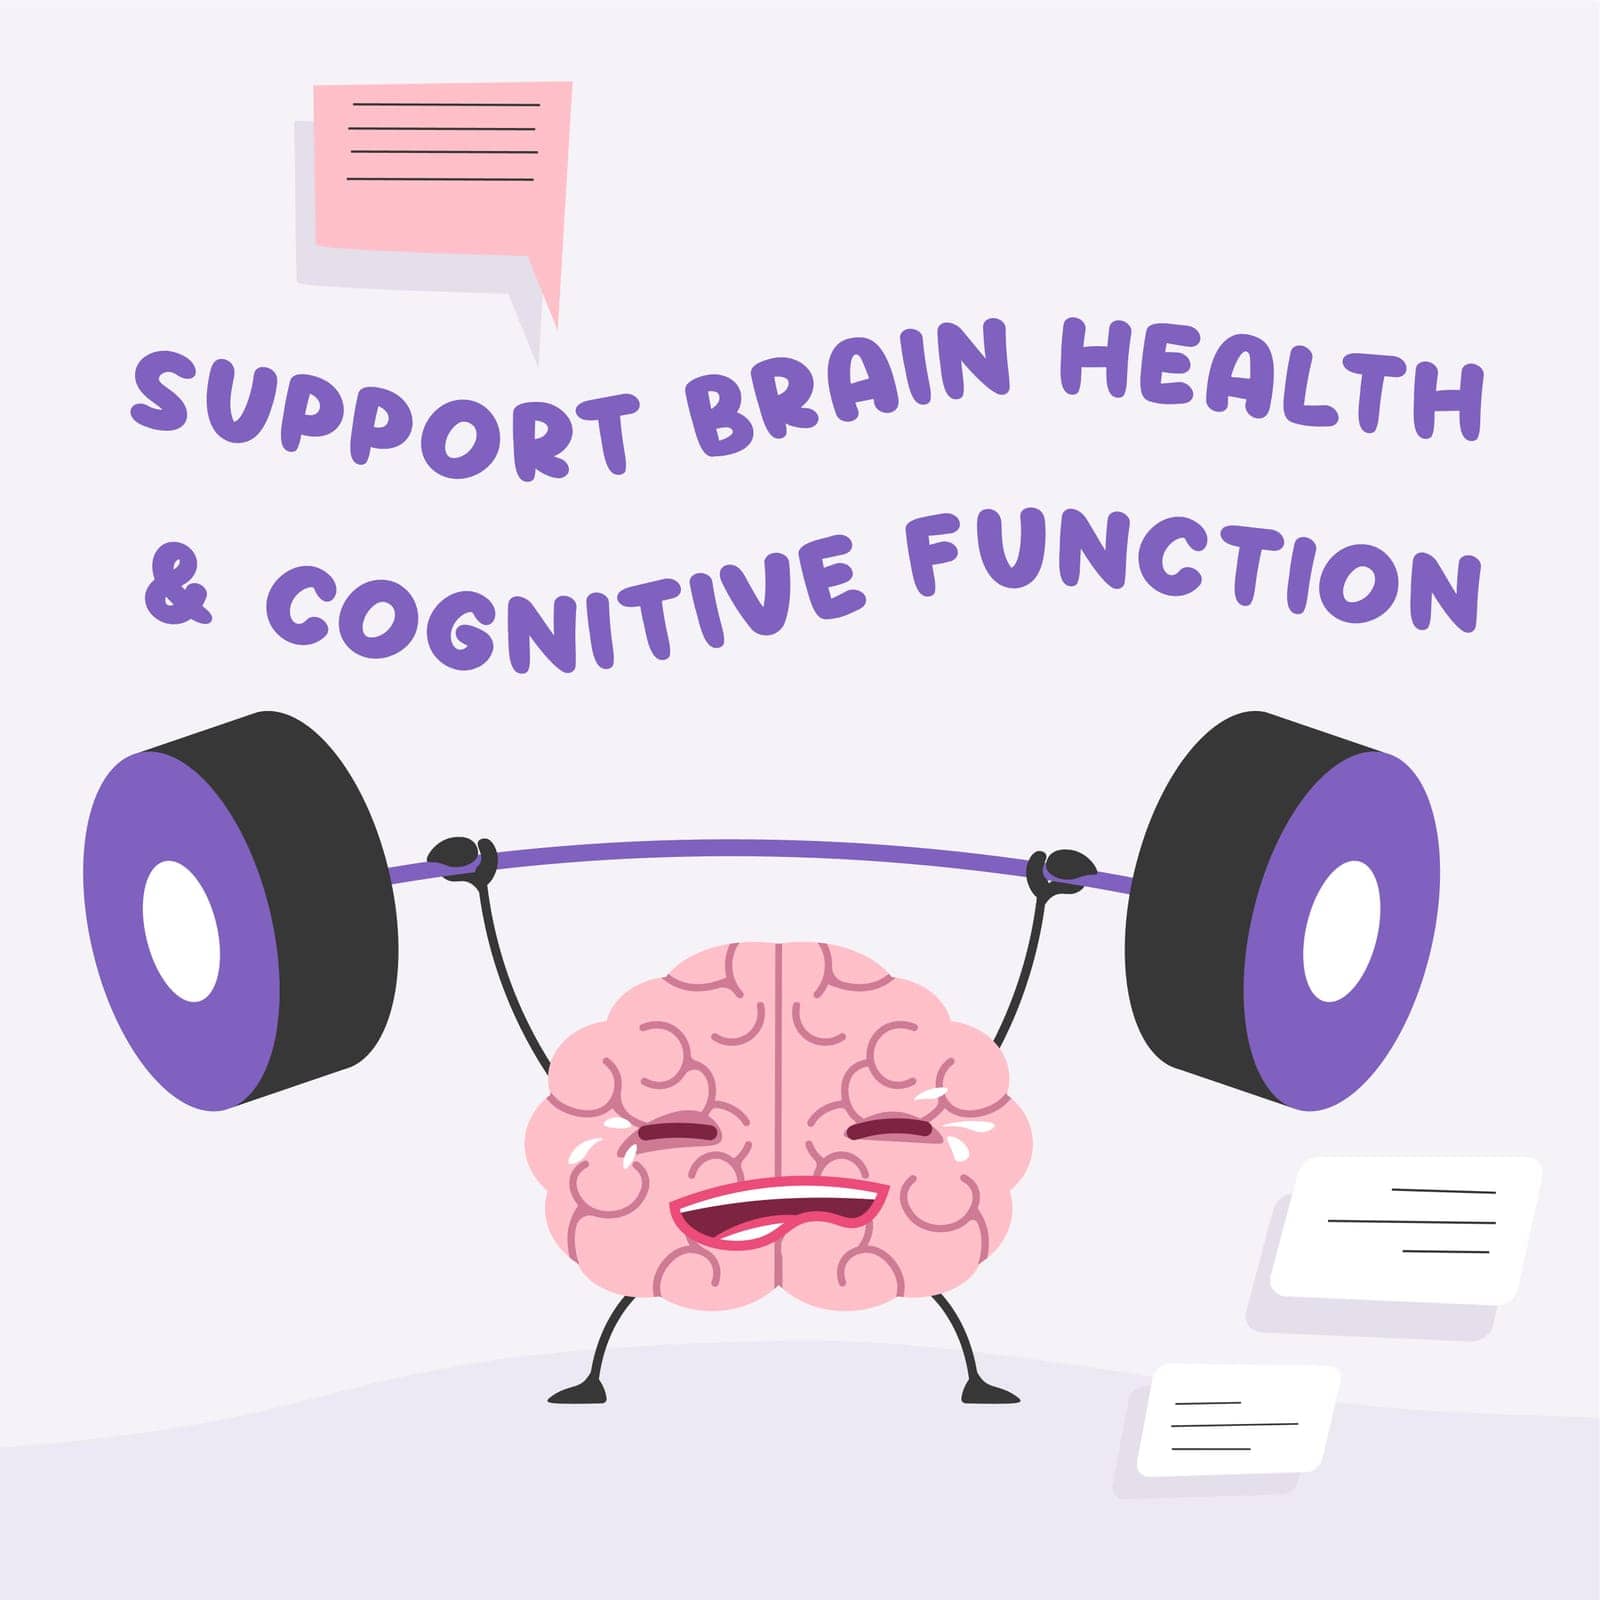 Animated brain lifting weights, flat design, vector illustration, promoting brain health and cognitive function, isolated on purple background.